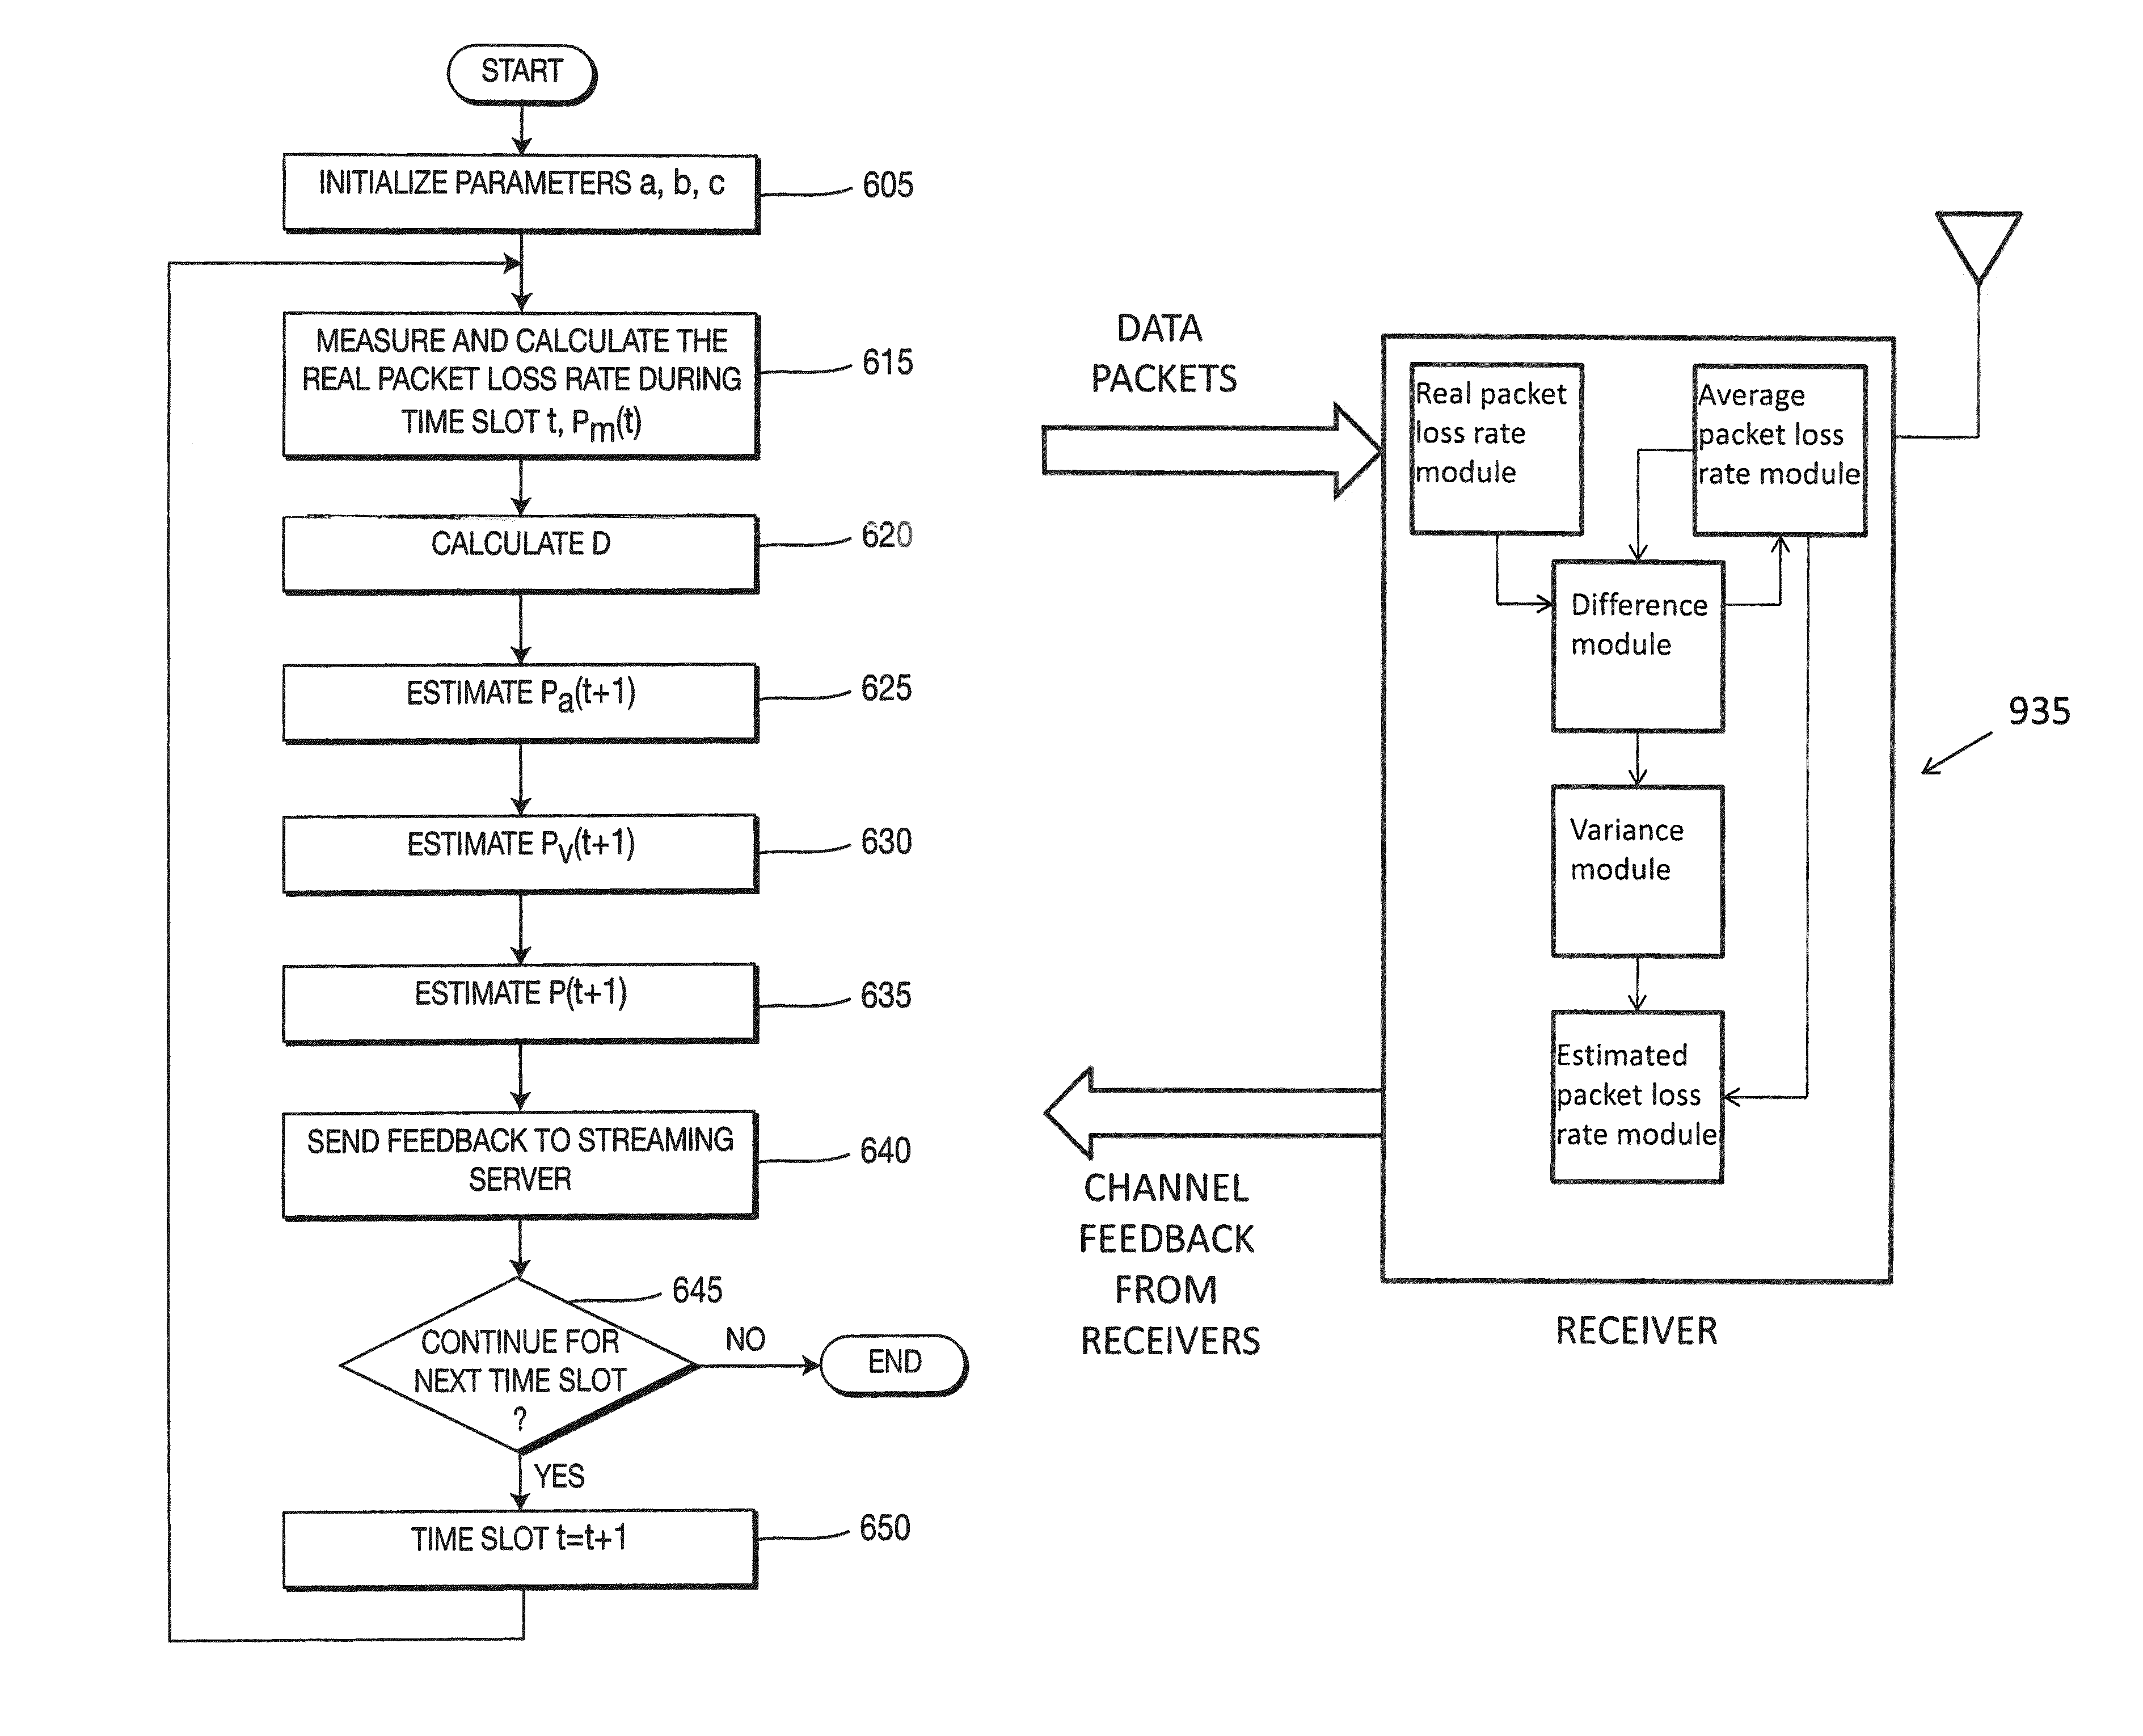 Adaptive joint source and channel coding scheme for H.264 video multicasting over wireless networks